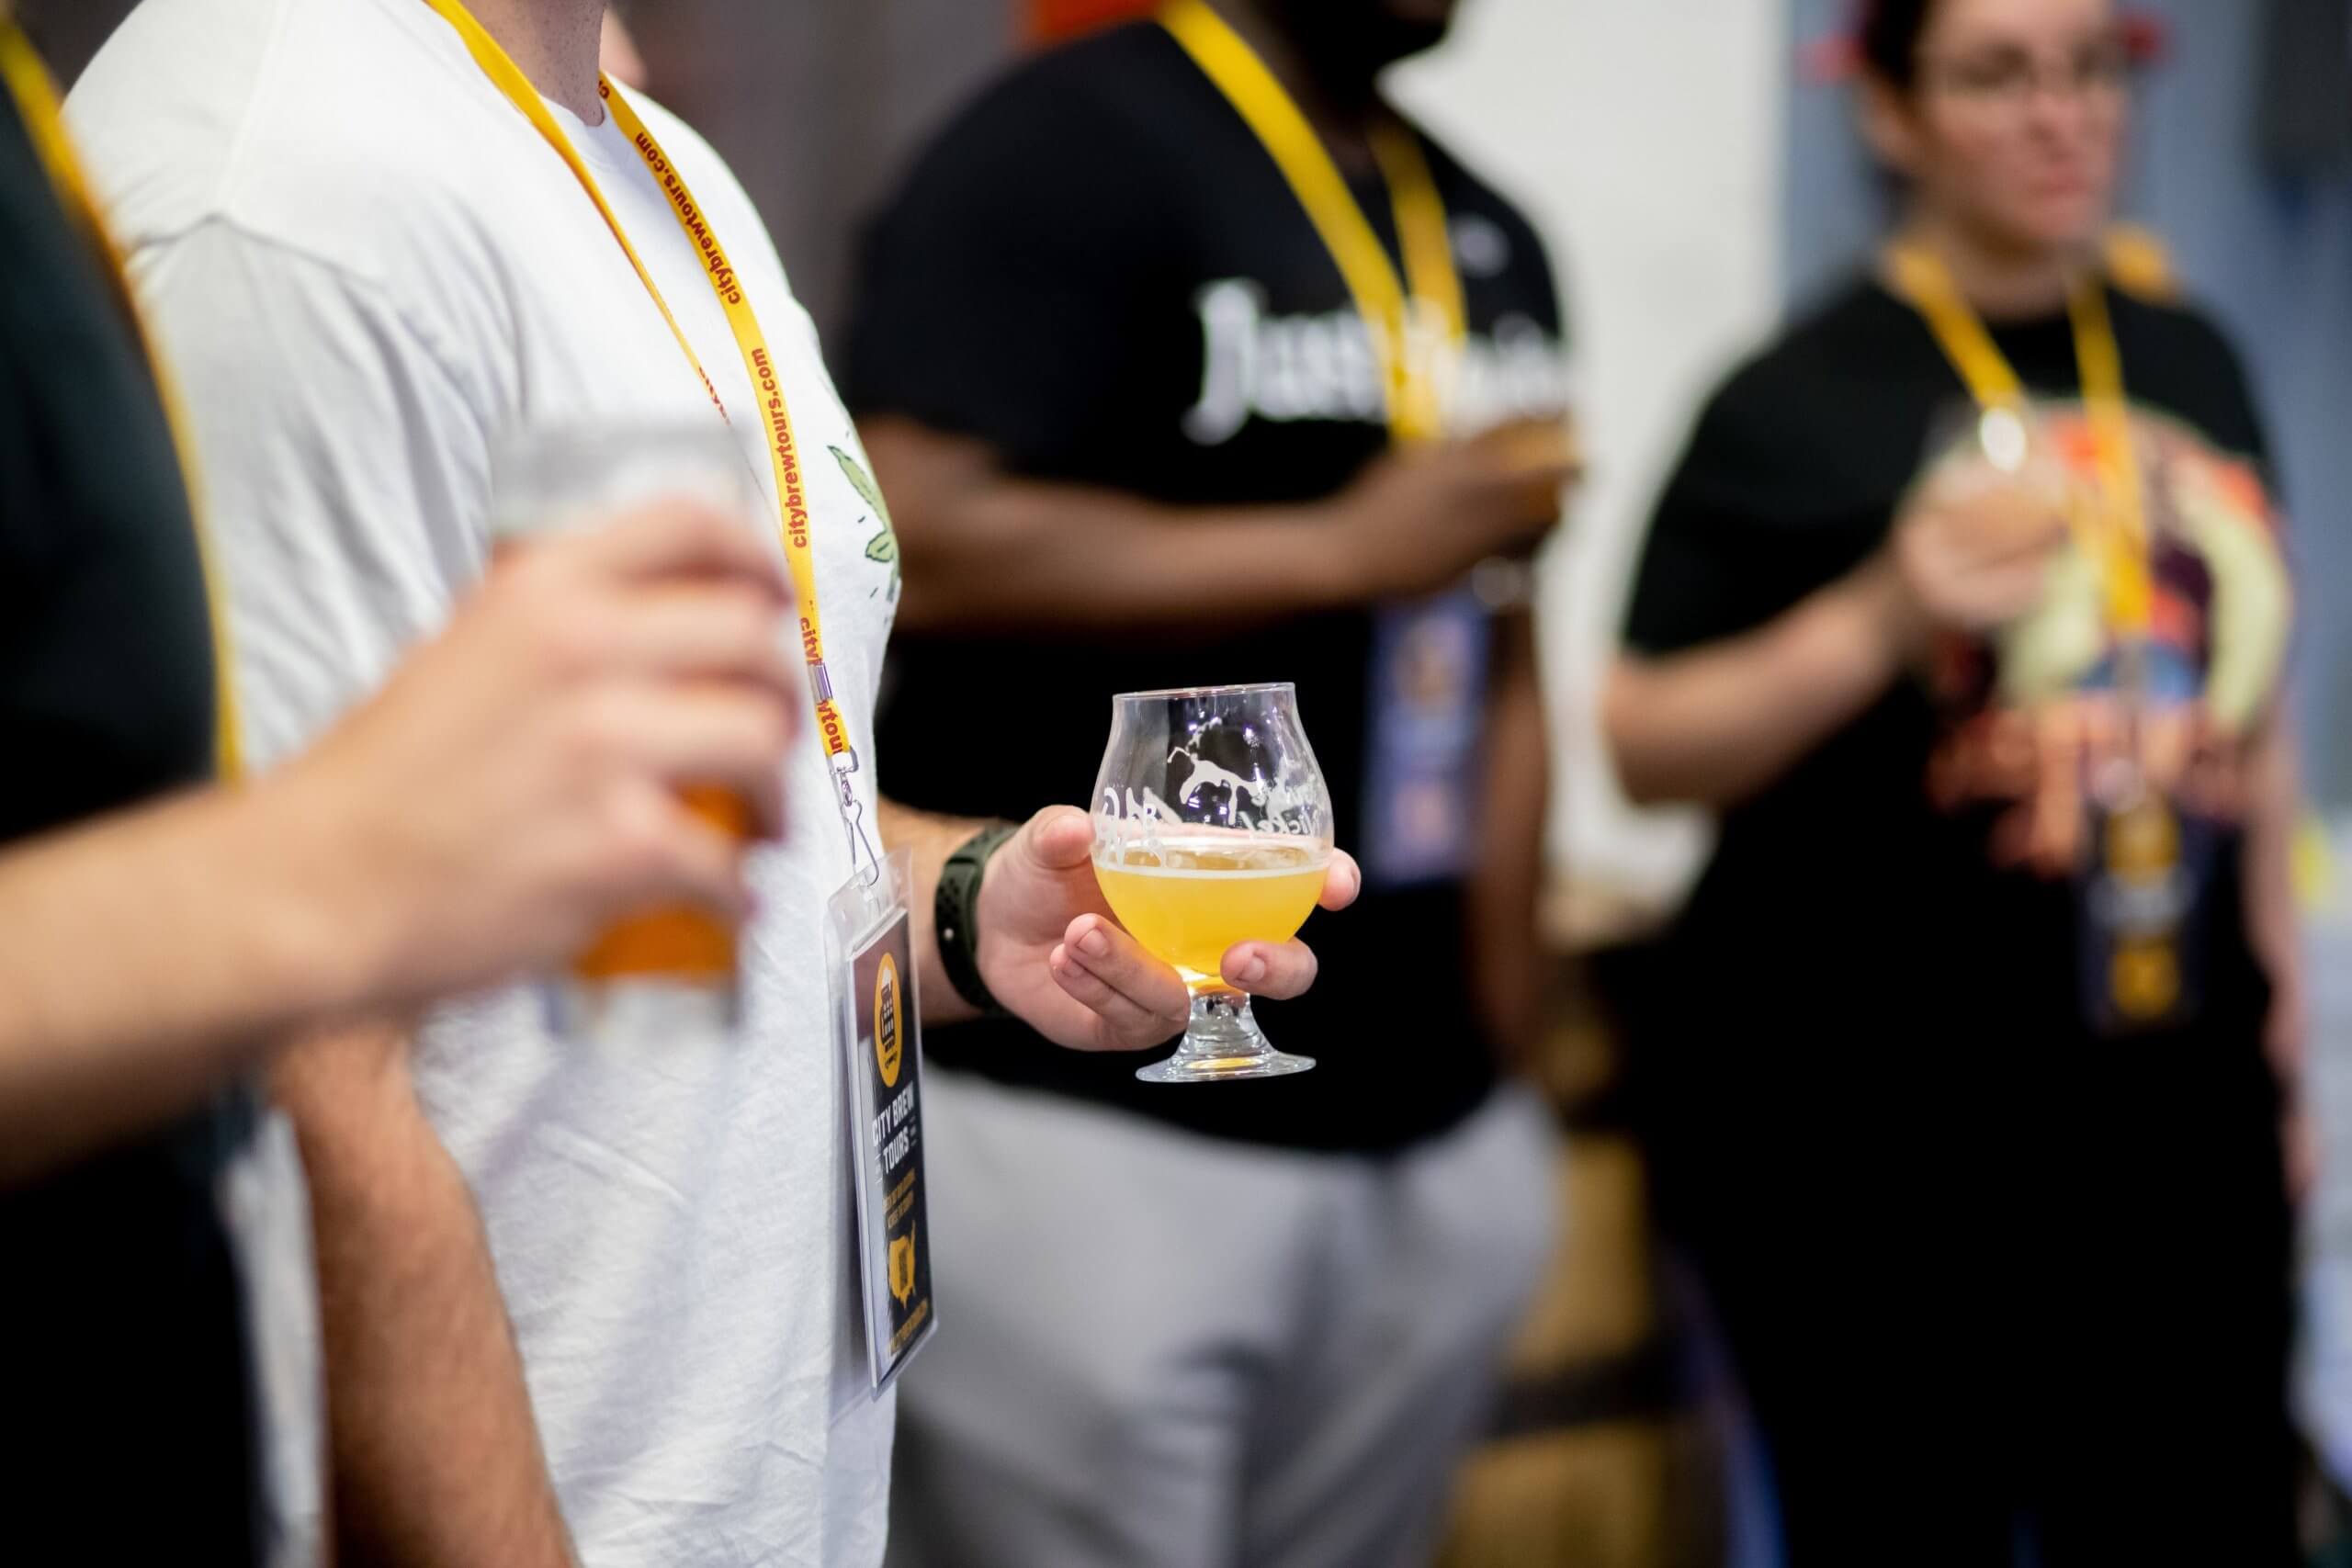 Four individuals are shown from the shoulders down. They are holding glasses of beer in their hands. Each person is wearing a yellow lanyard with a badge attached.